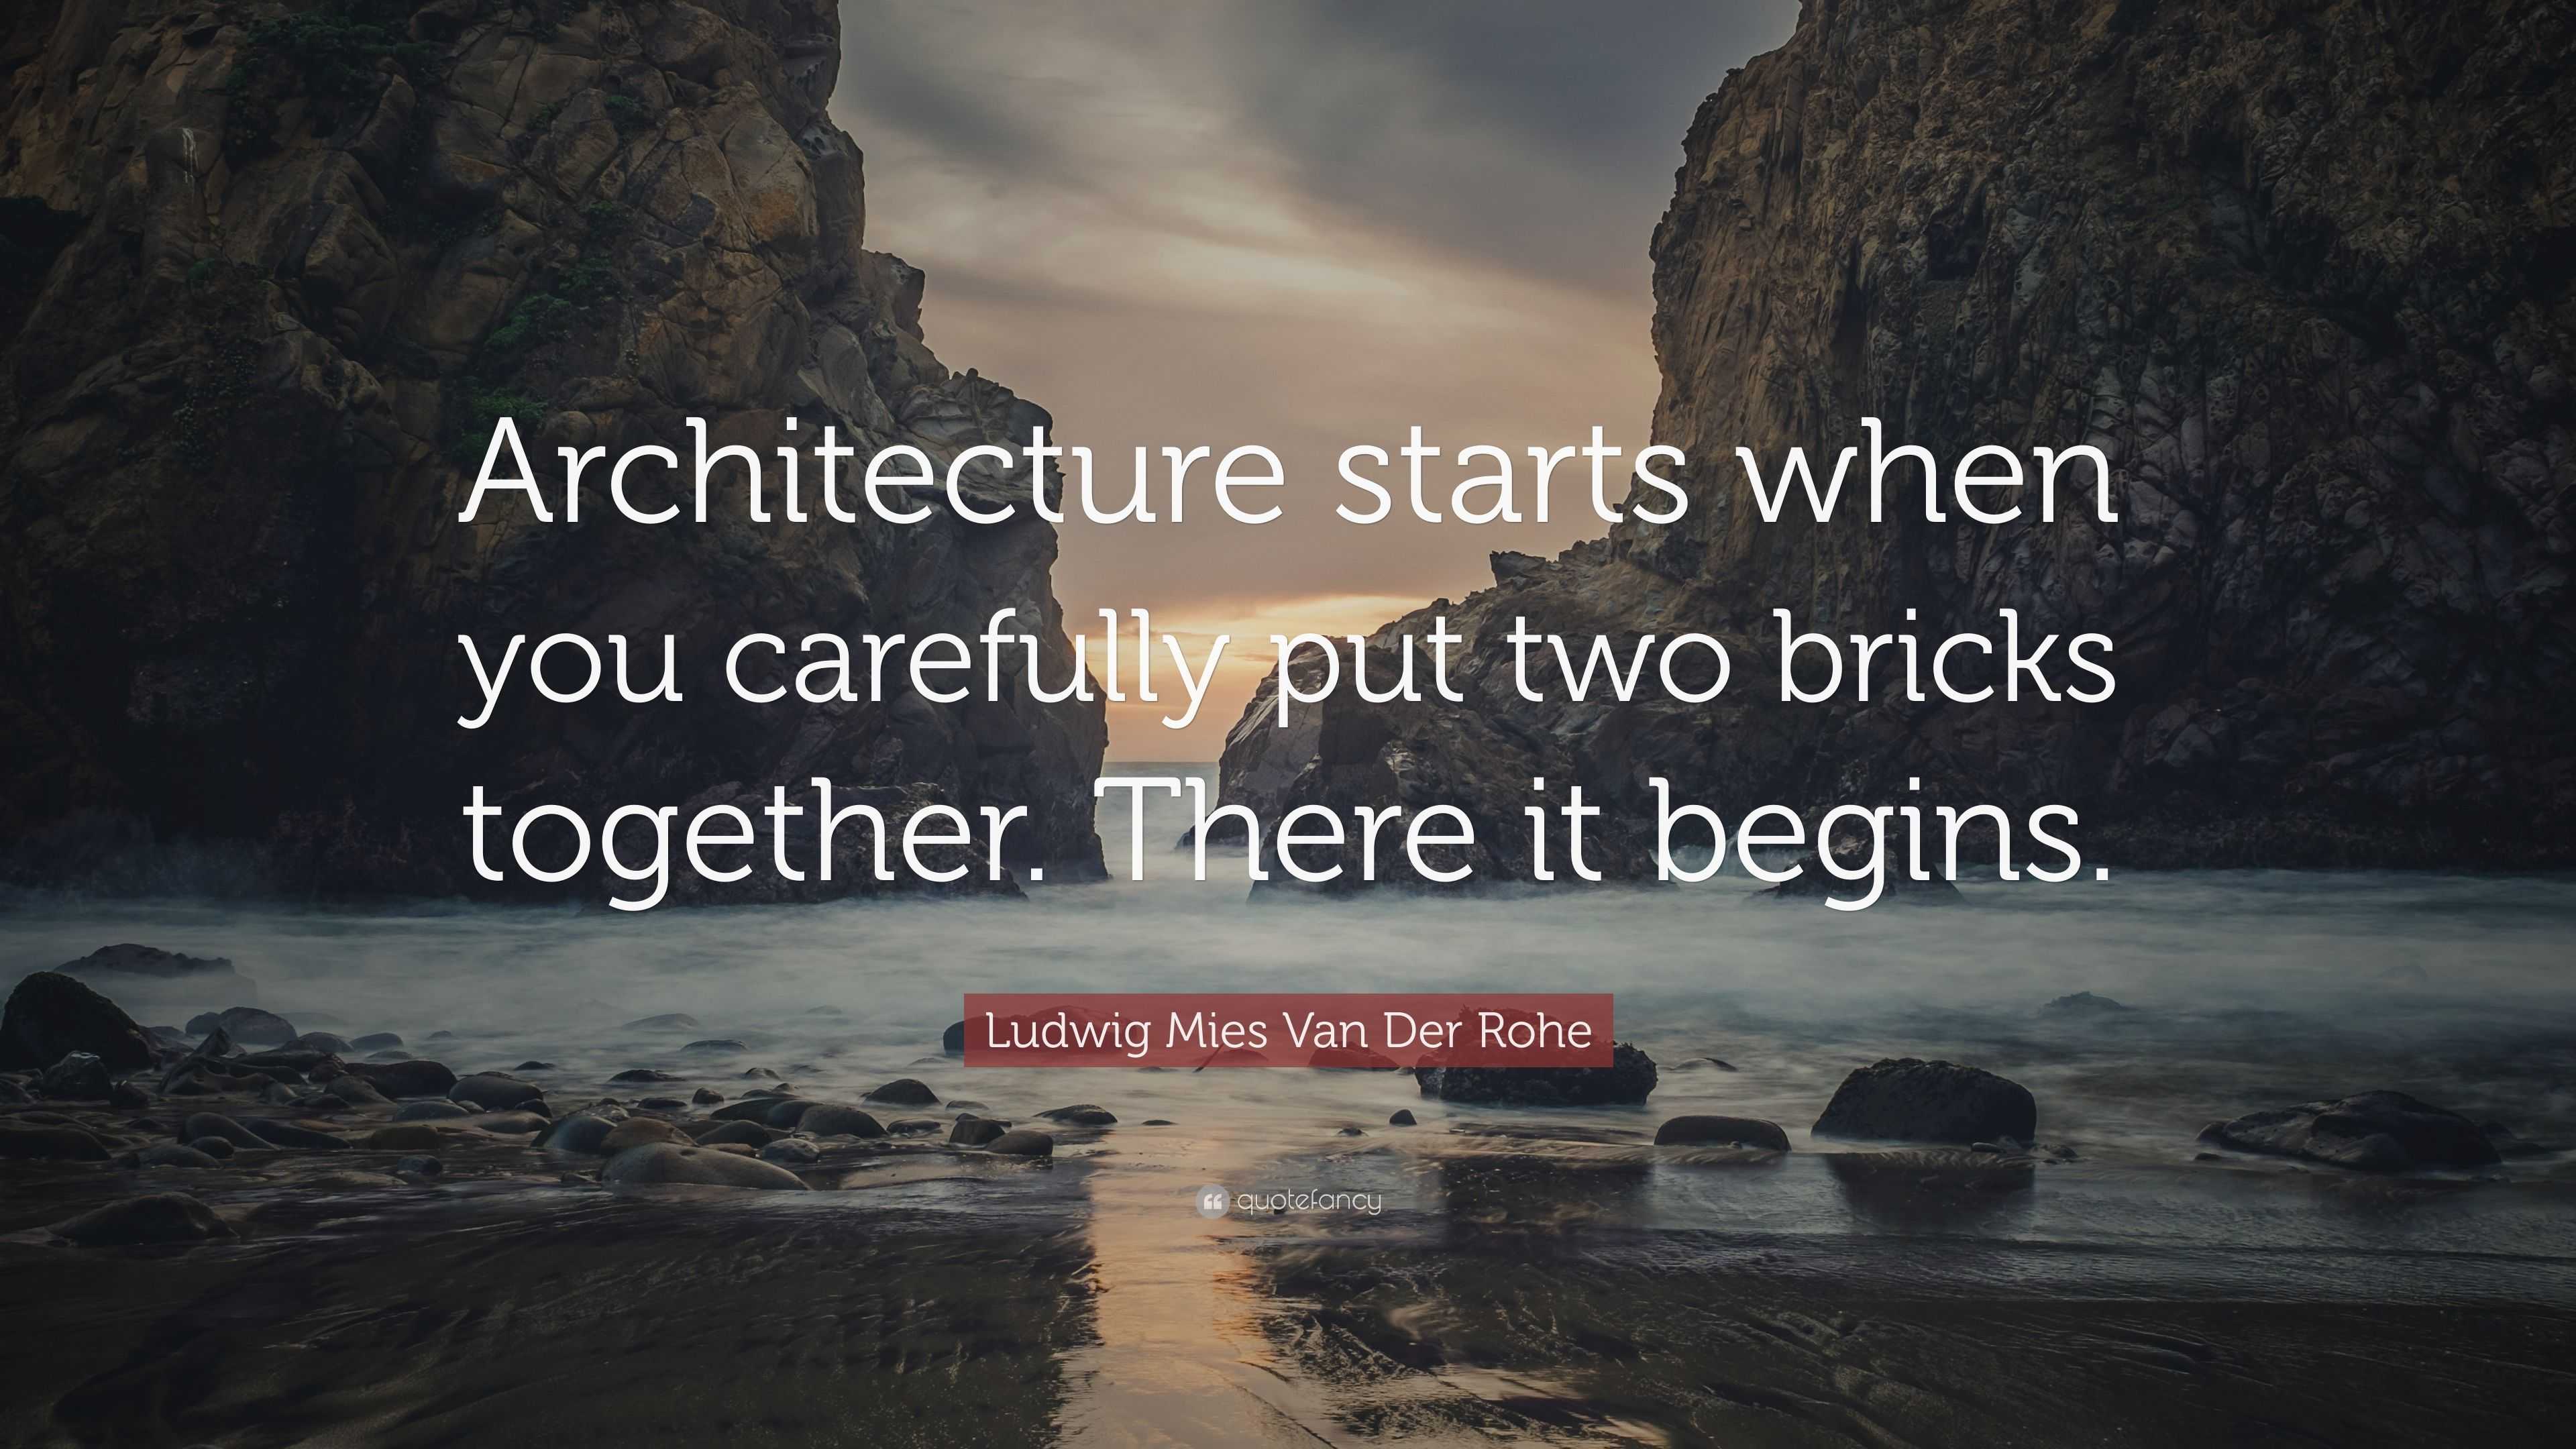 Ludwig Mies Van Der Rohe Quote: “Architecture starts when you carefully ...